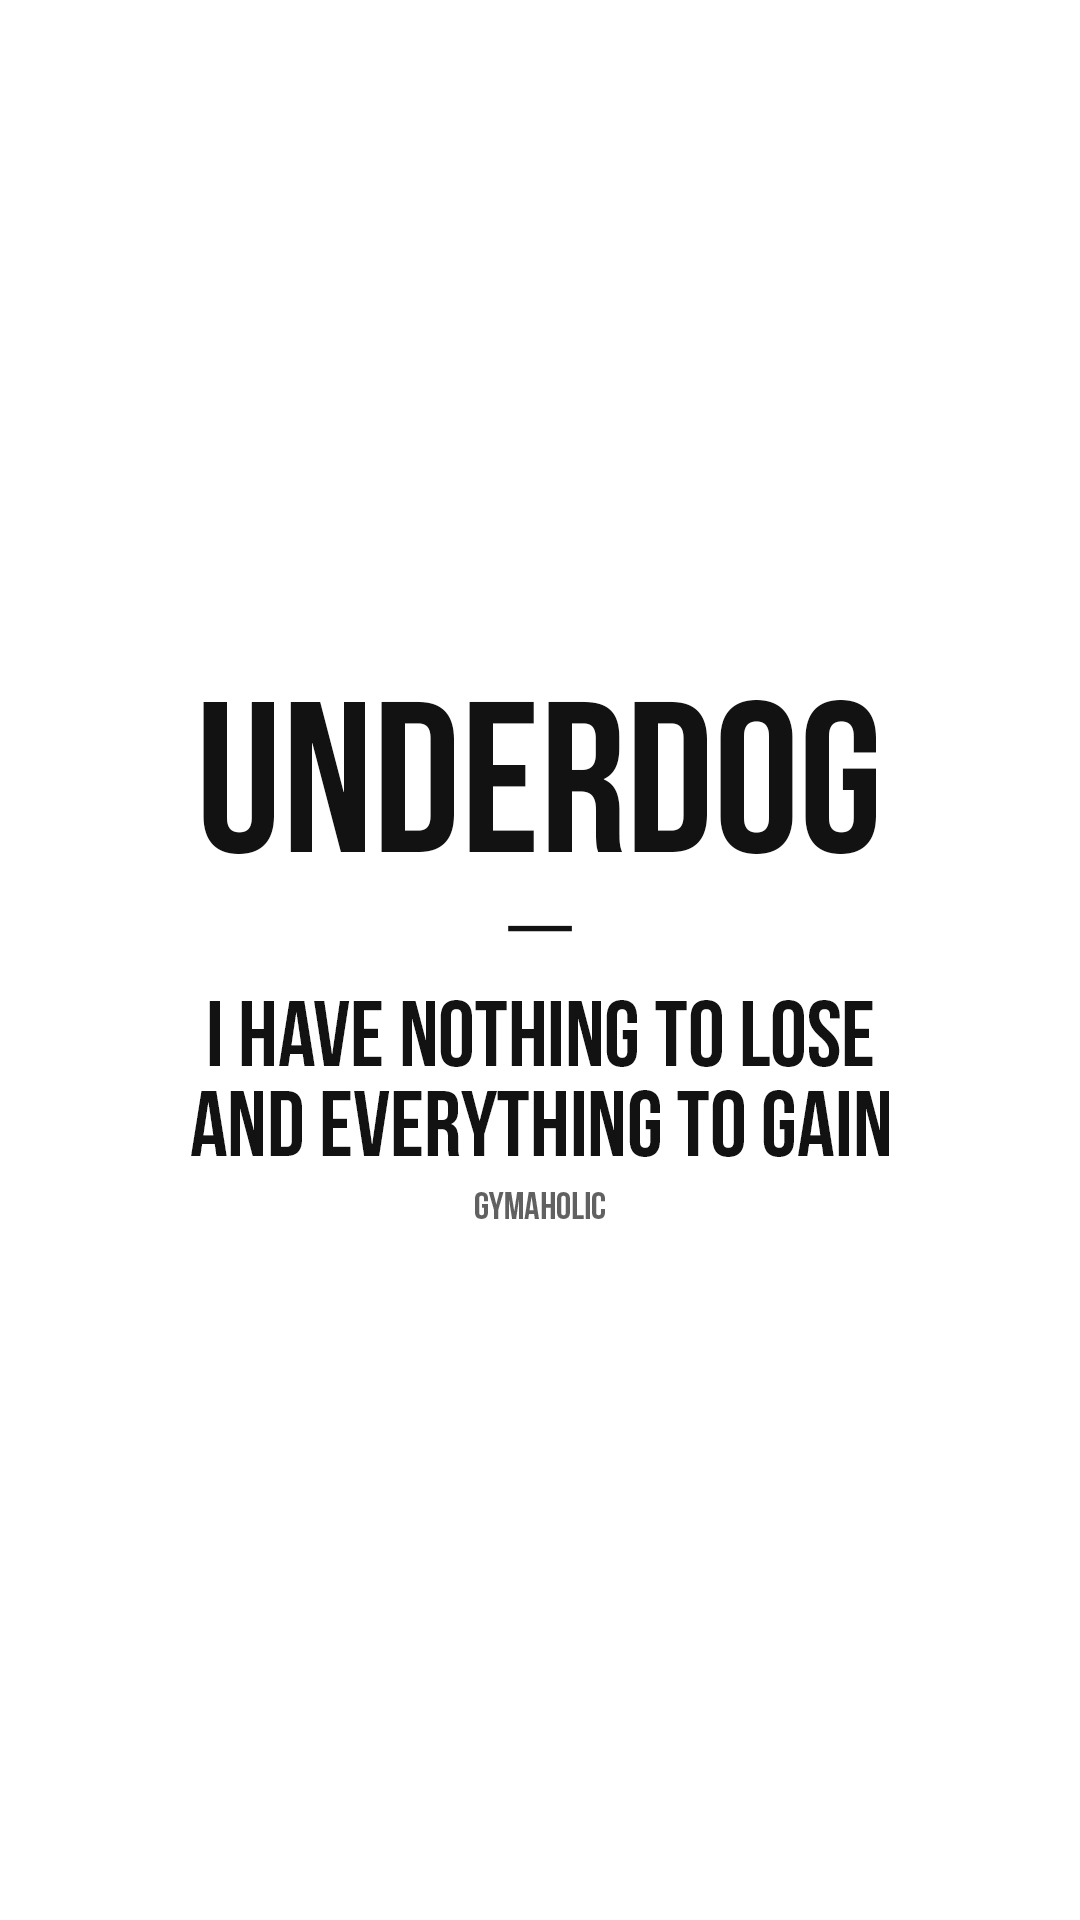 Underdog: I have nothing to lose and everything to gain